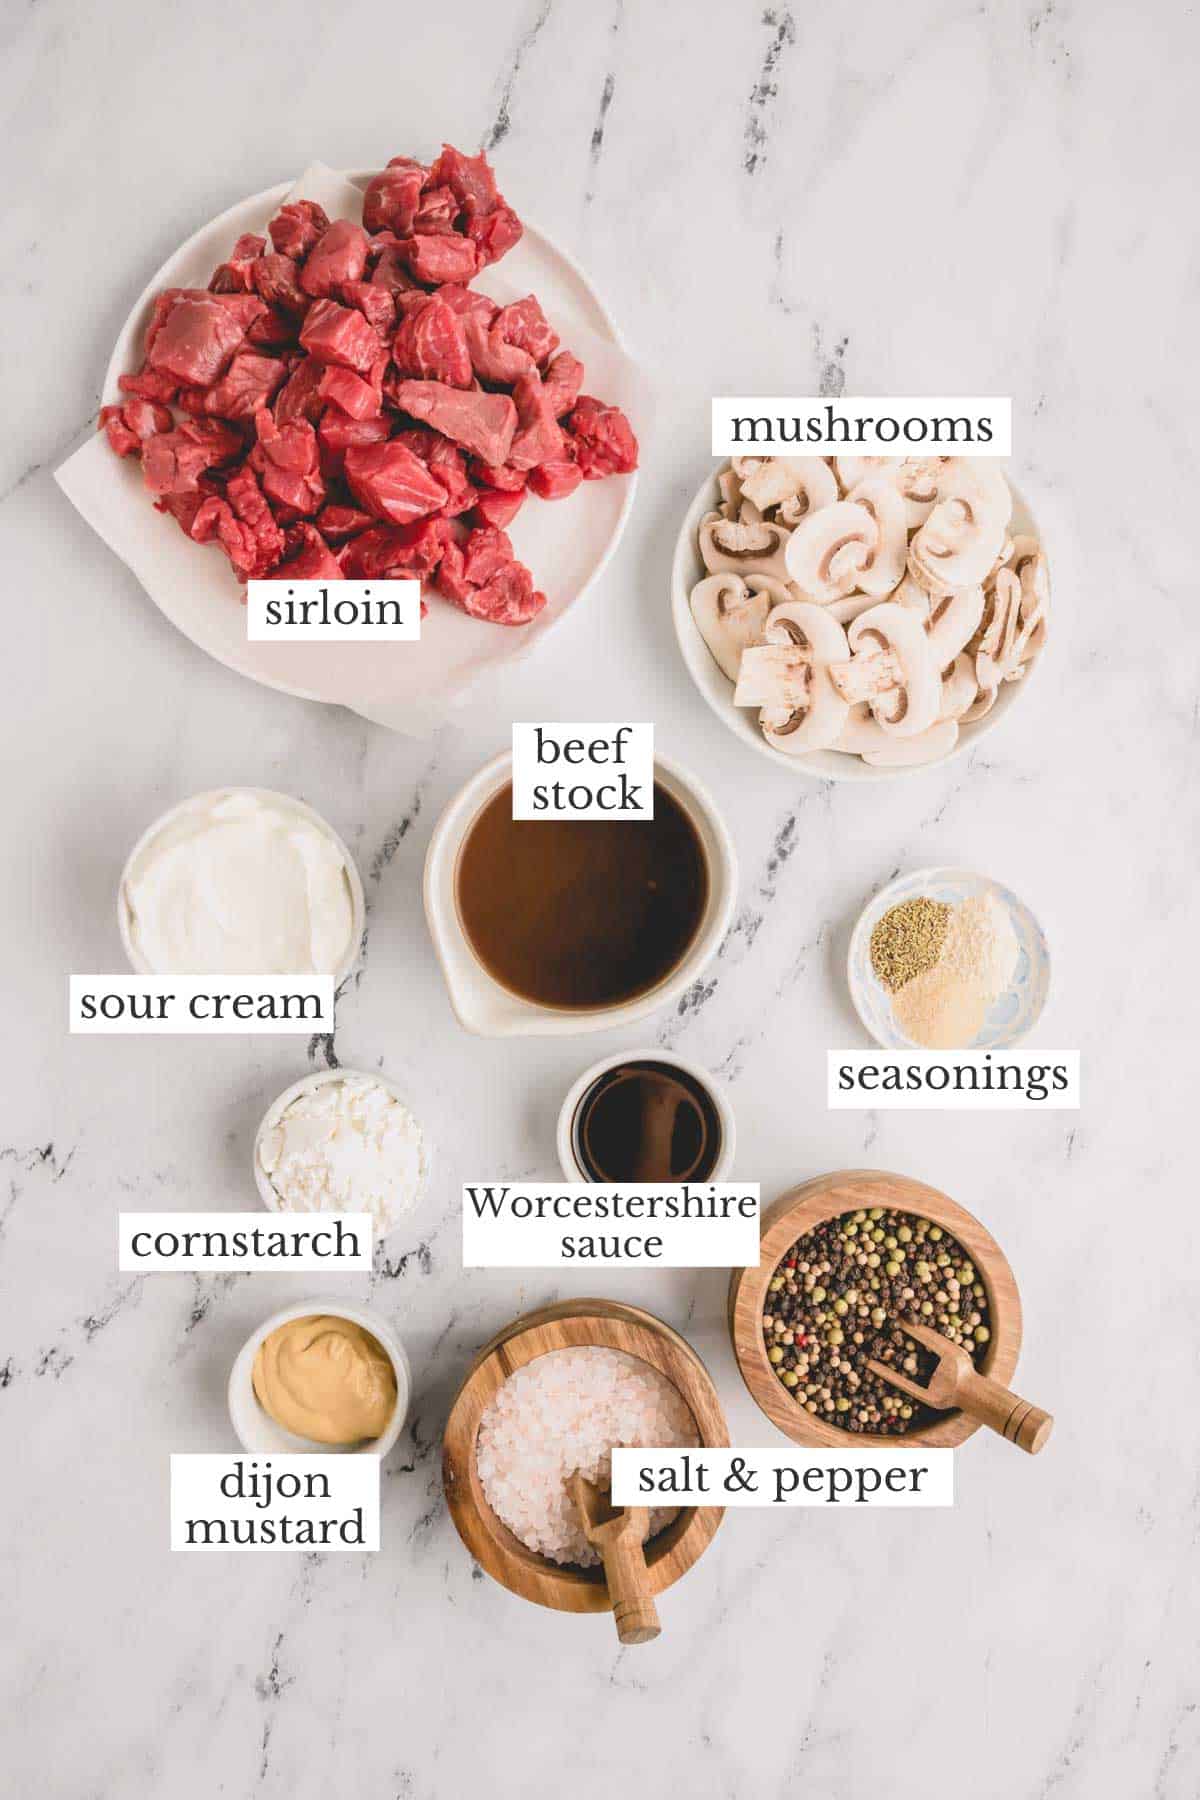 Ingredients to make slow cooker beef stroganoff including sirloin and mushrooms.